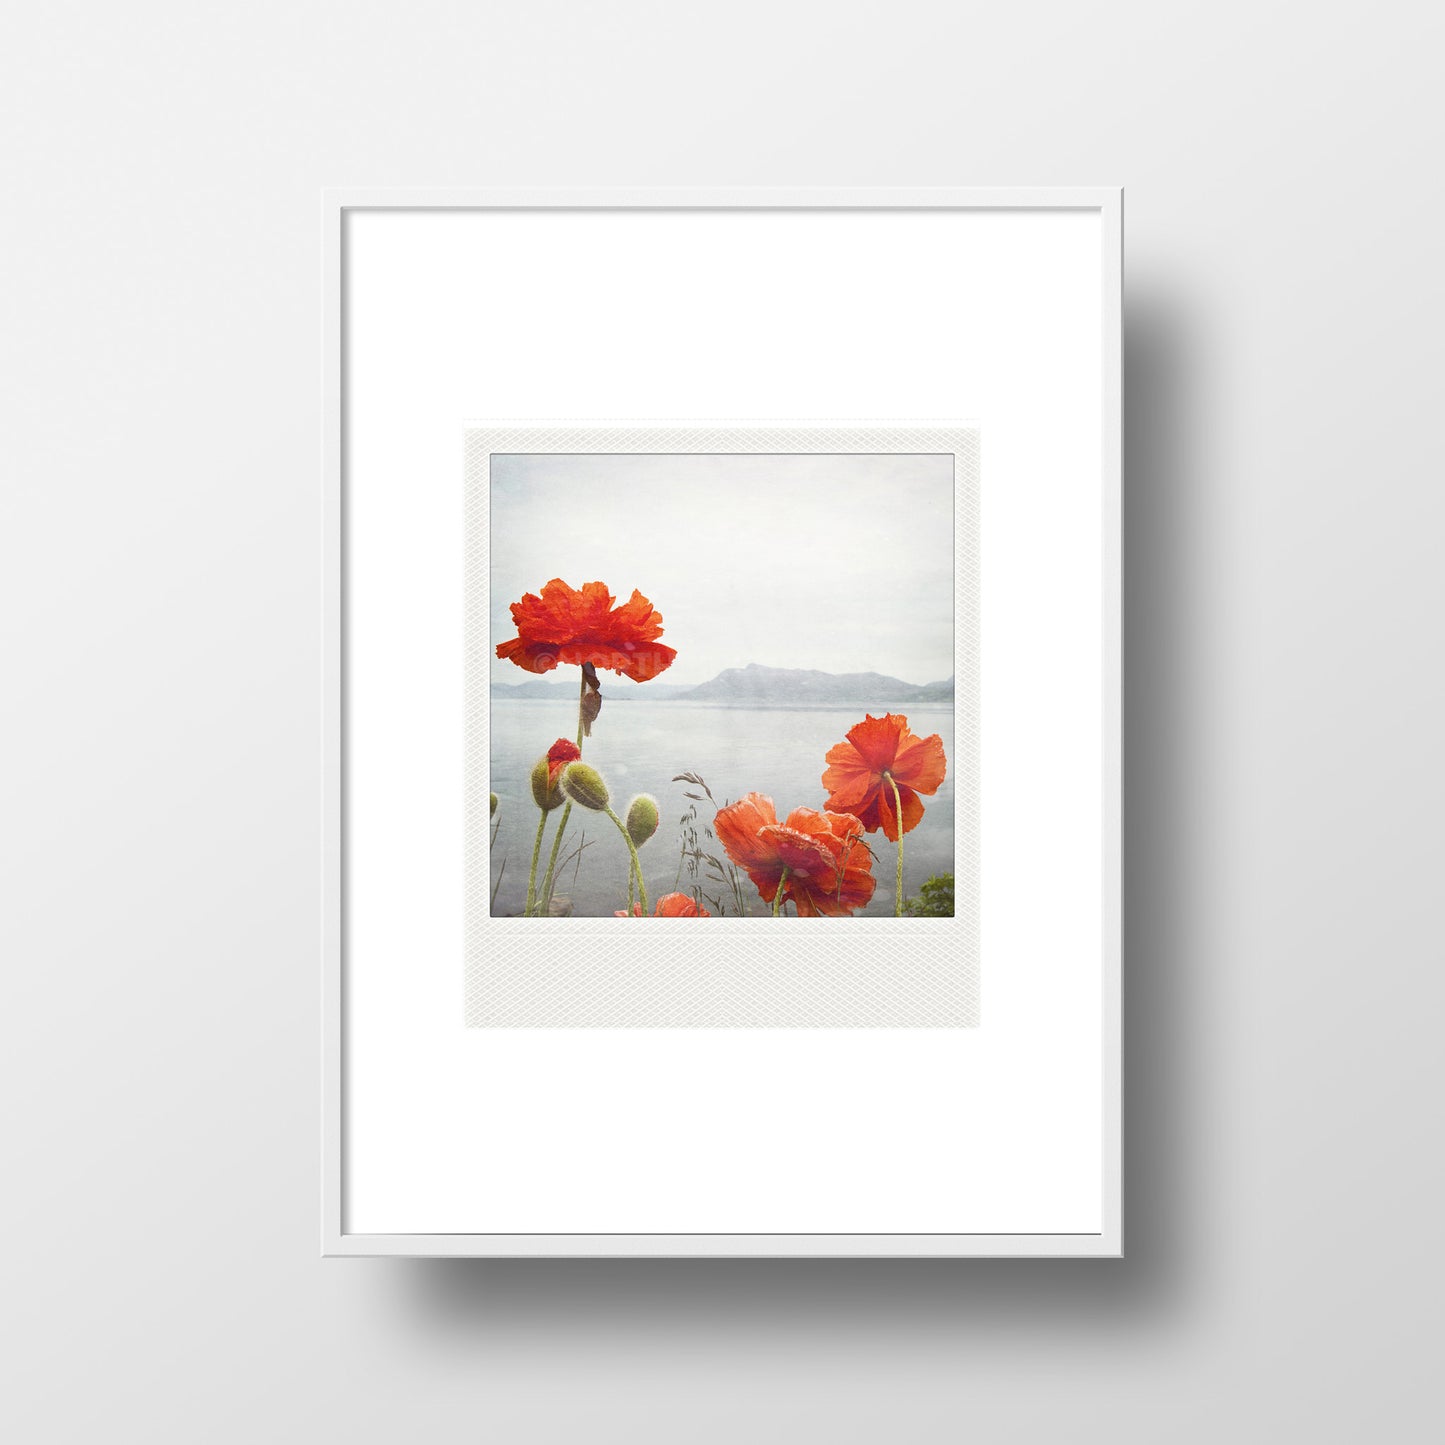 CLEARANCE <br> Metallic Polaroid Magnet <br>Poppies Along the Ocean